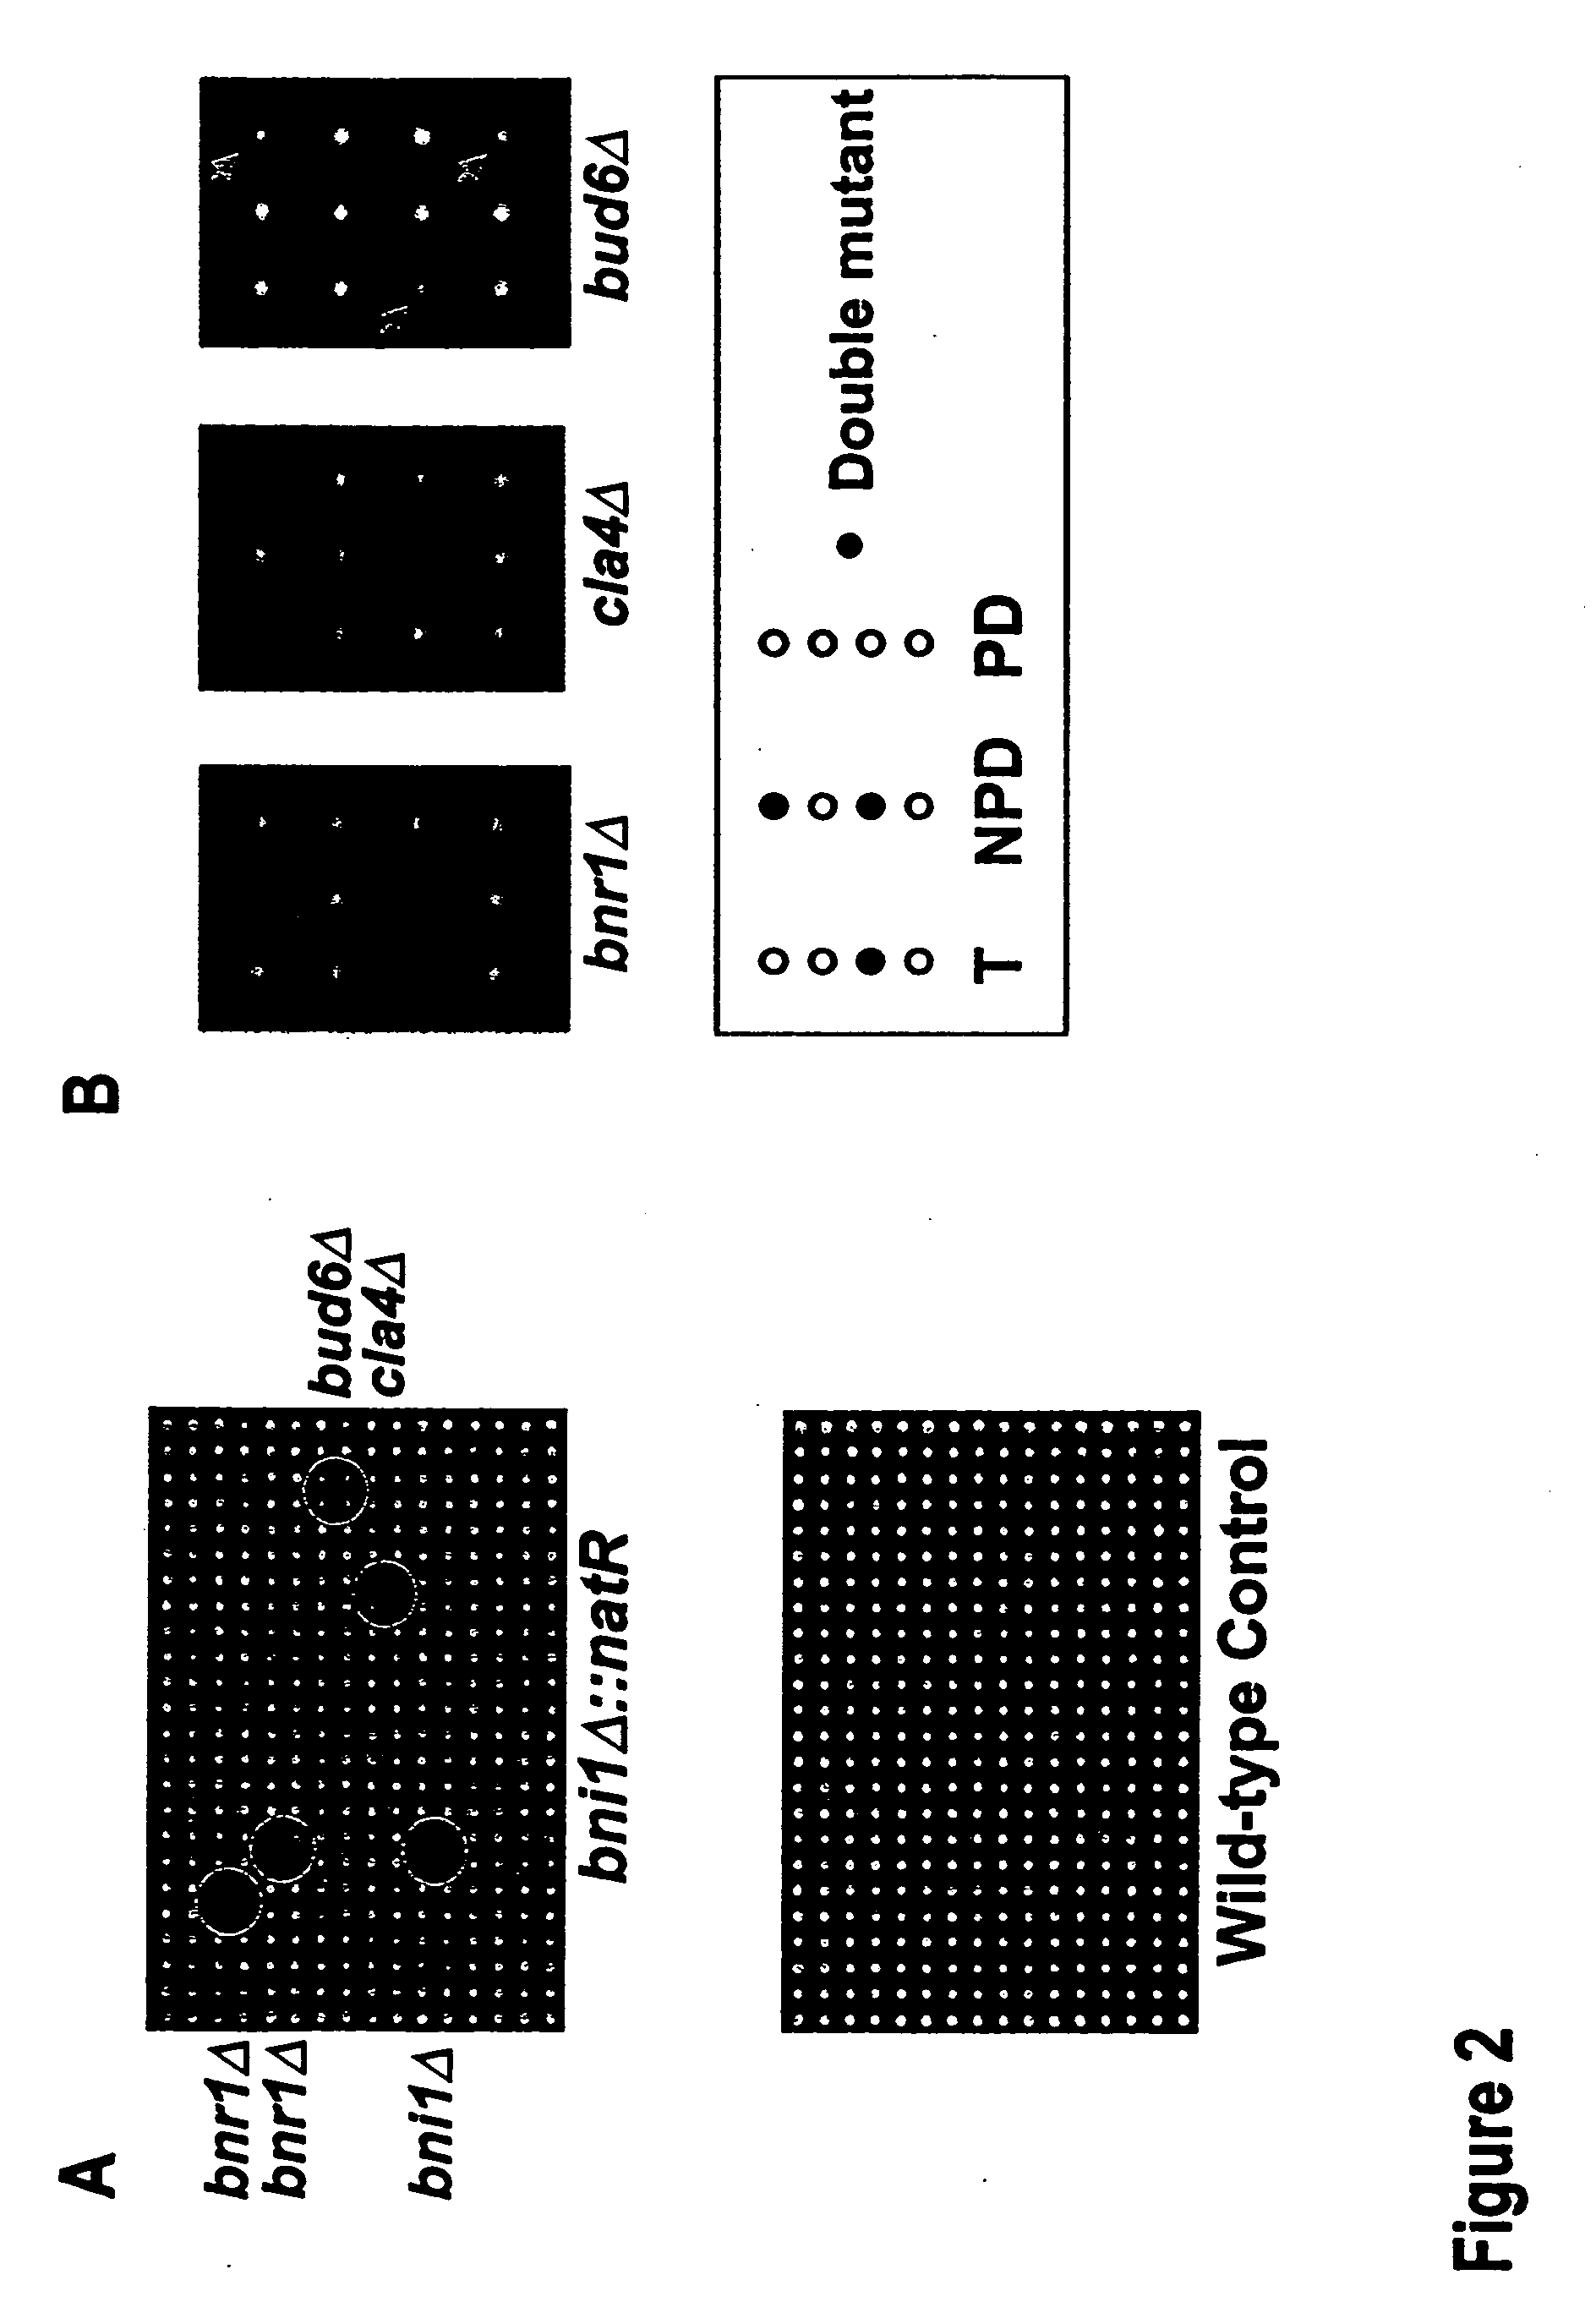 Yeast arrays, methods of making such arrays, and methods of analyzing such arrays